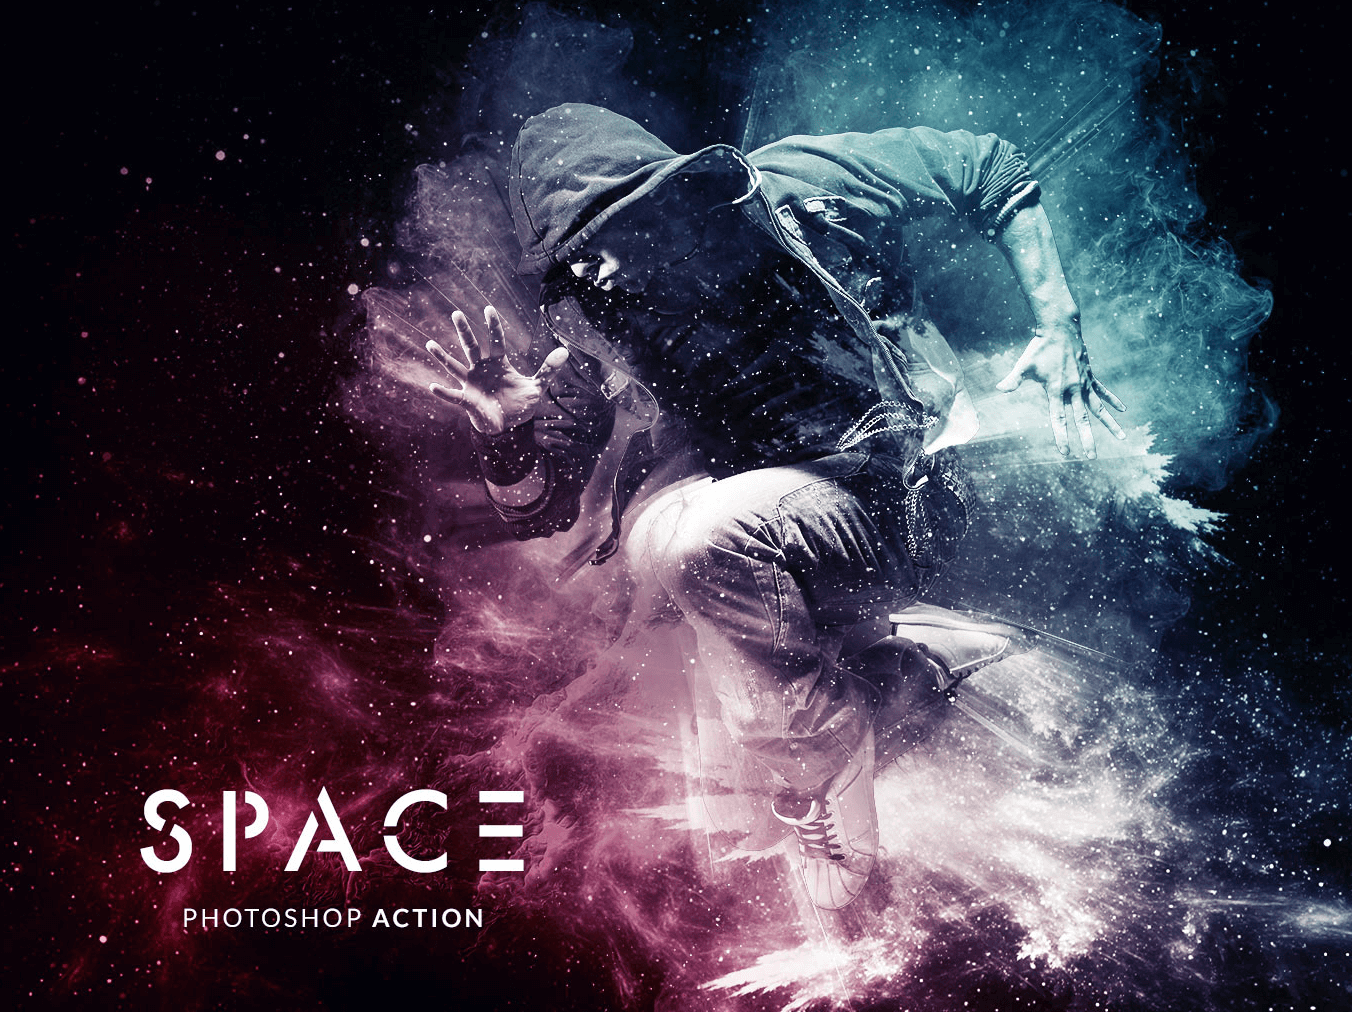 Photoshop action space おすすめ アクション